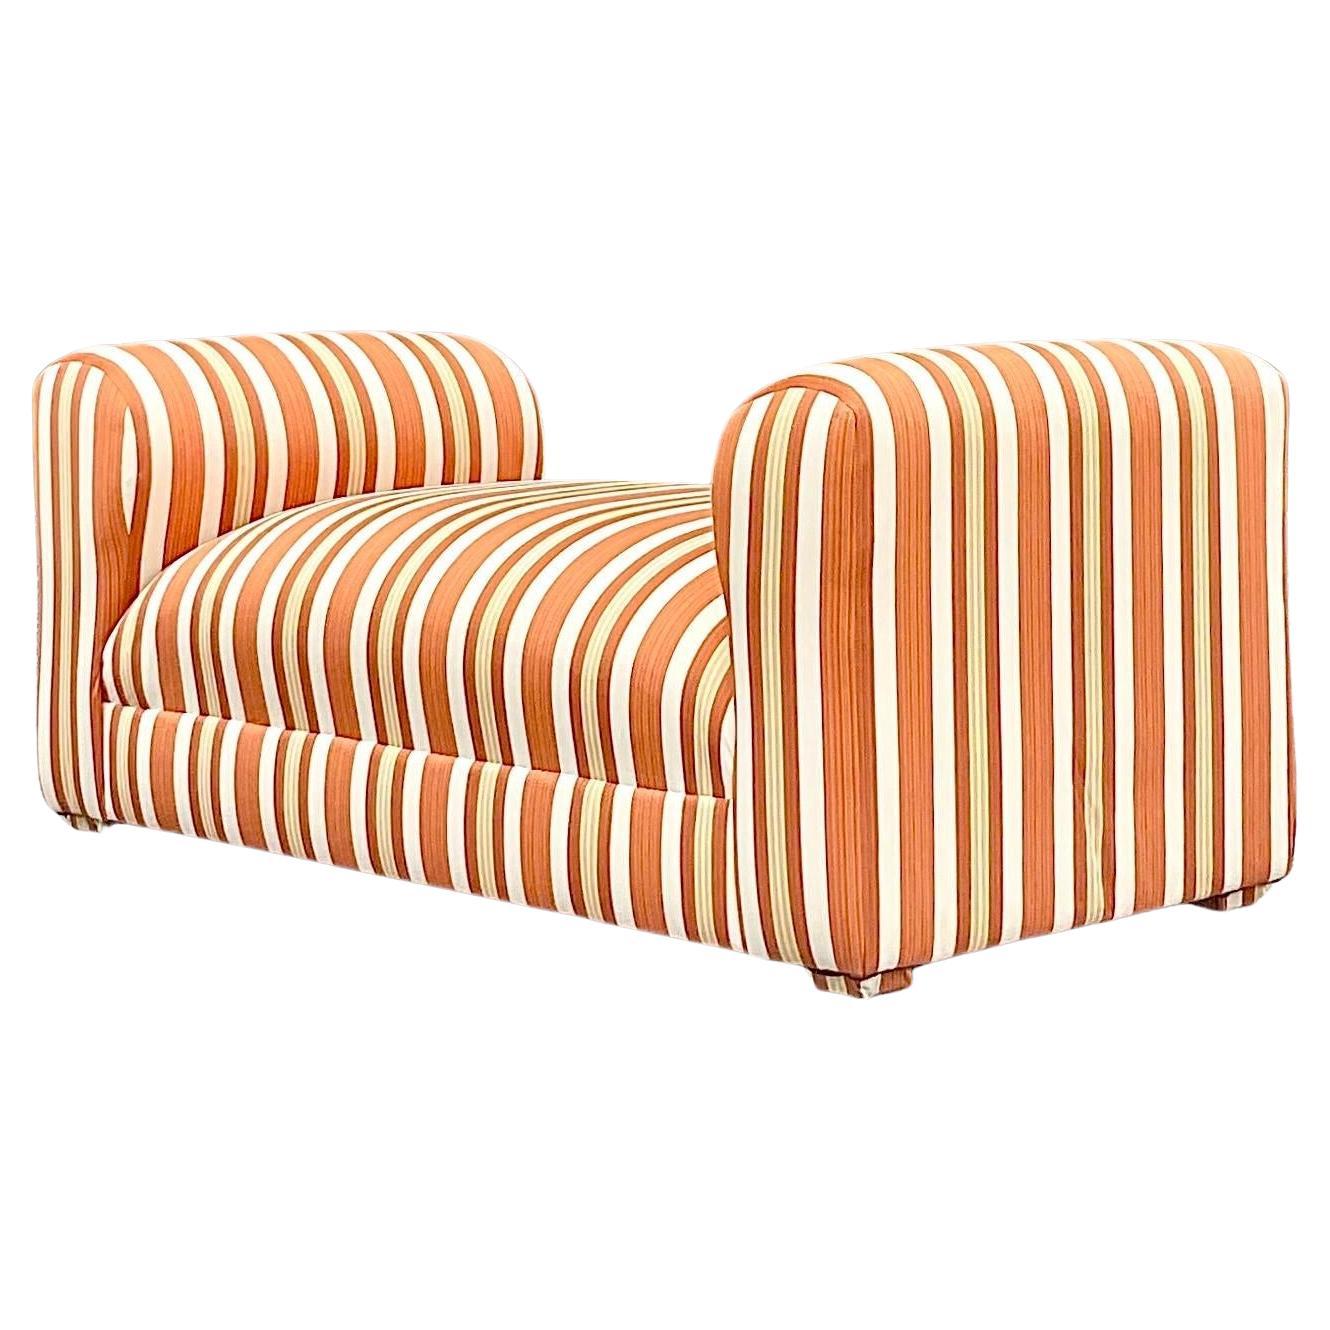 Late 20th Century Vintage Regency Striped Settee For Sale